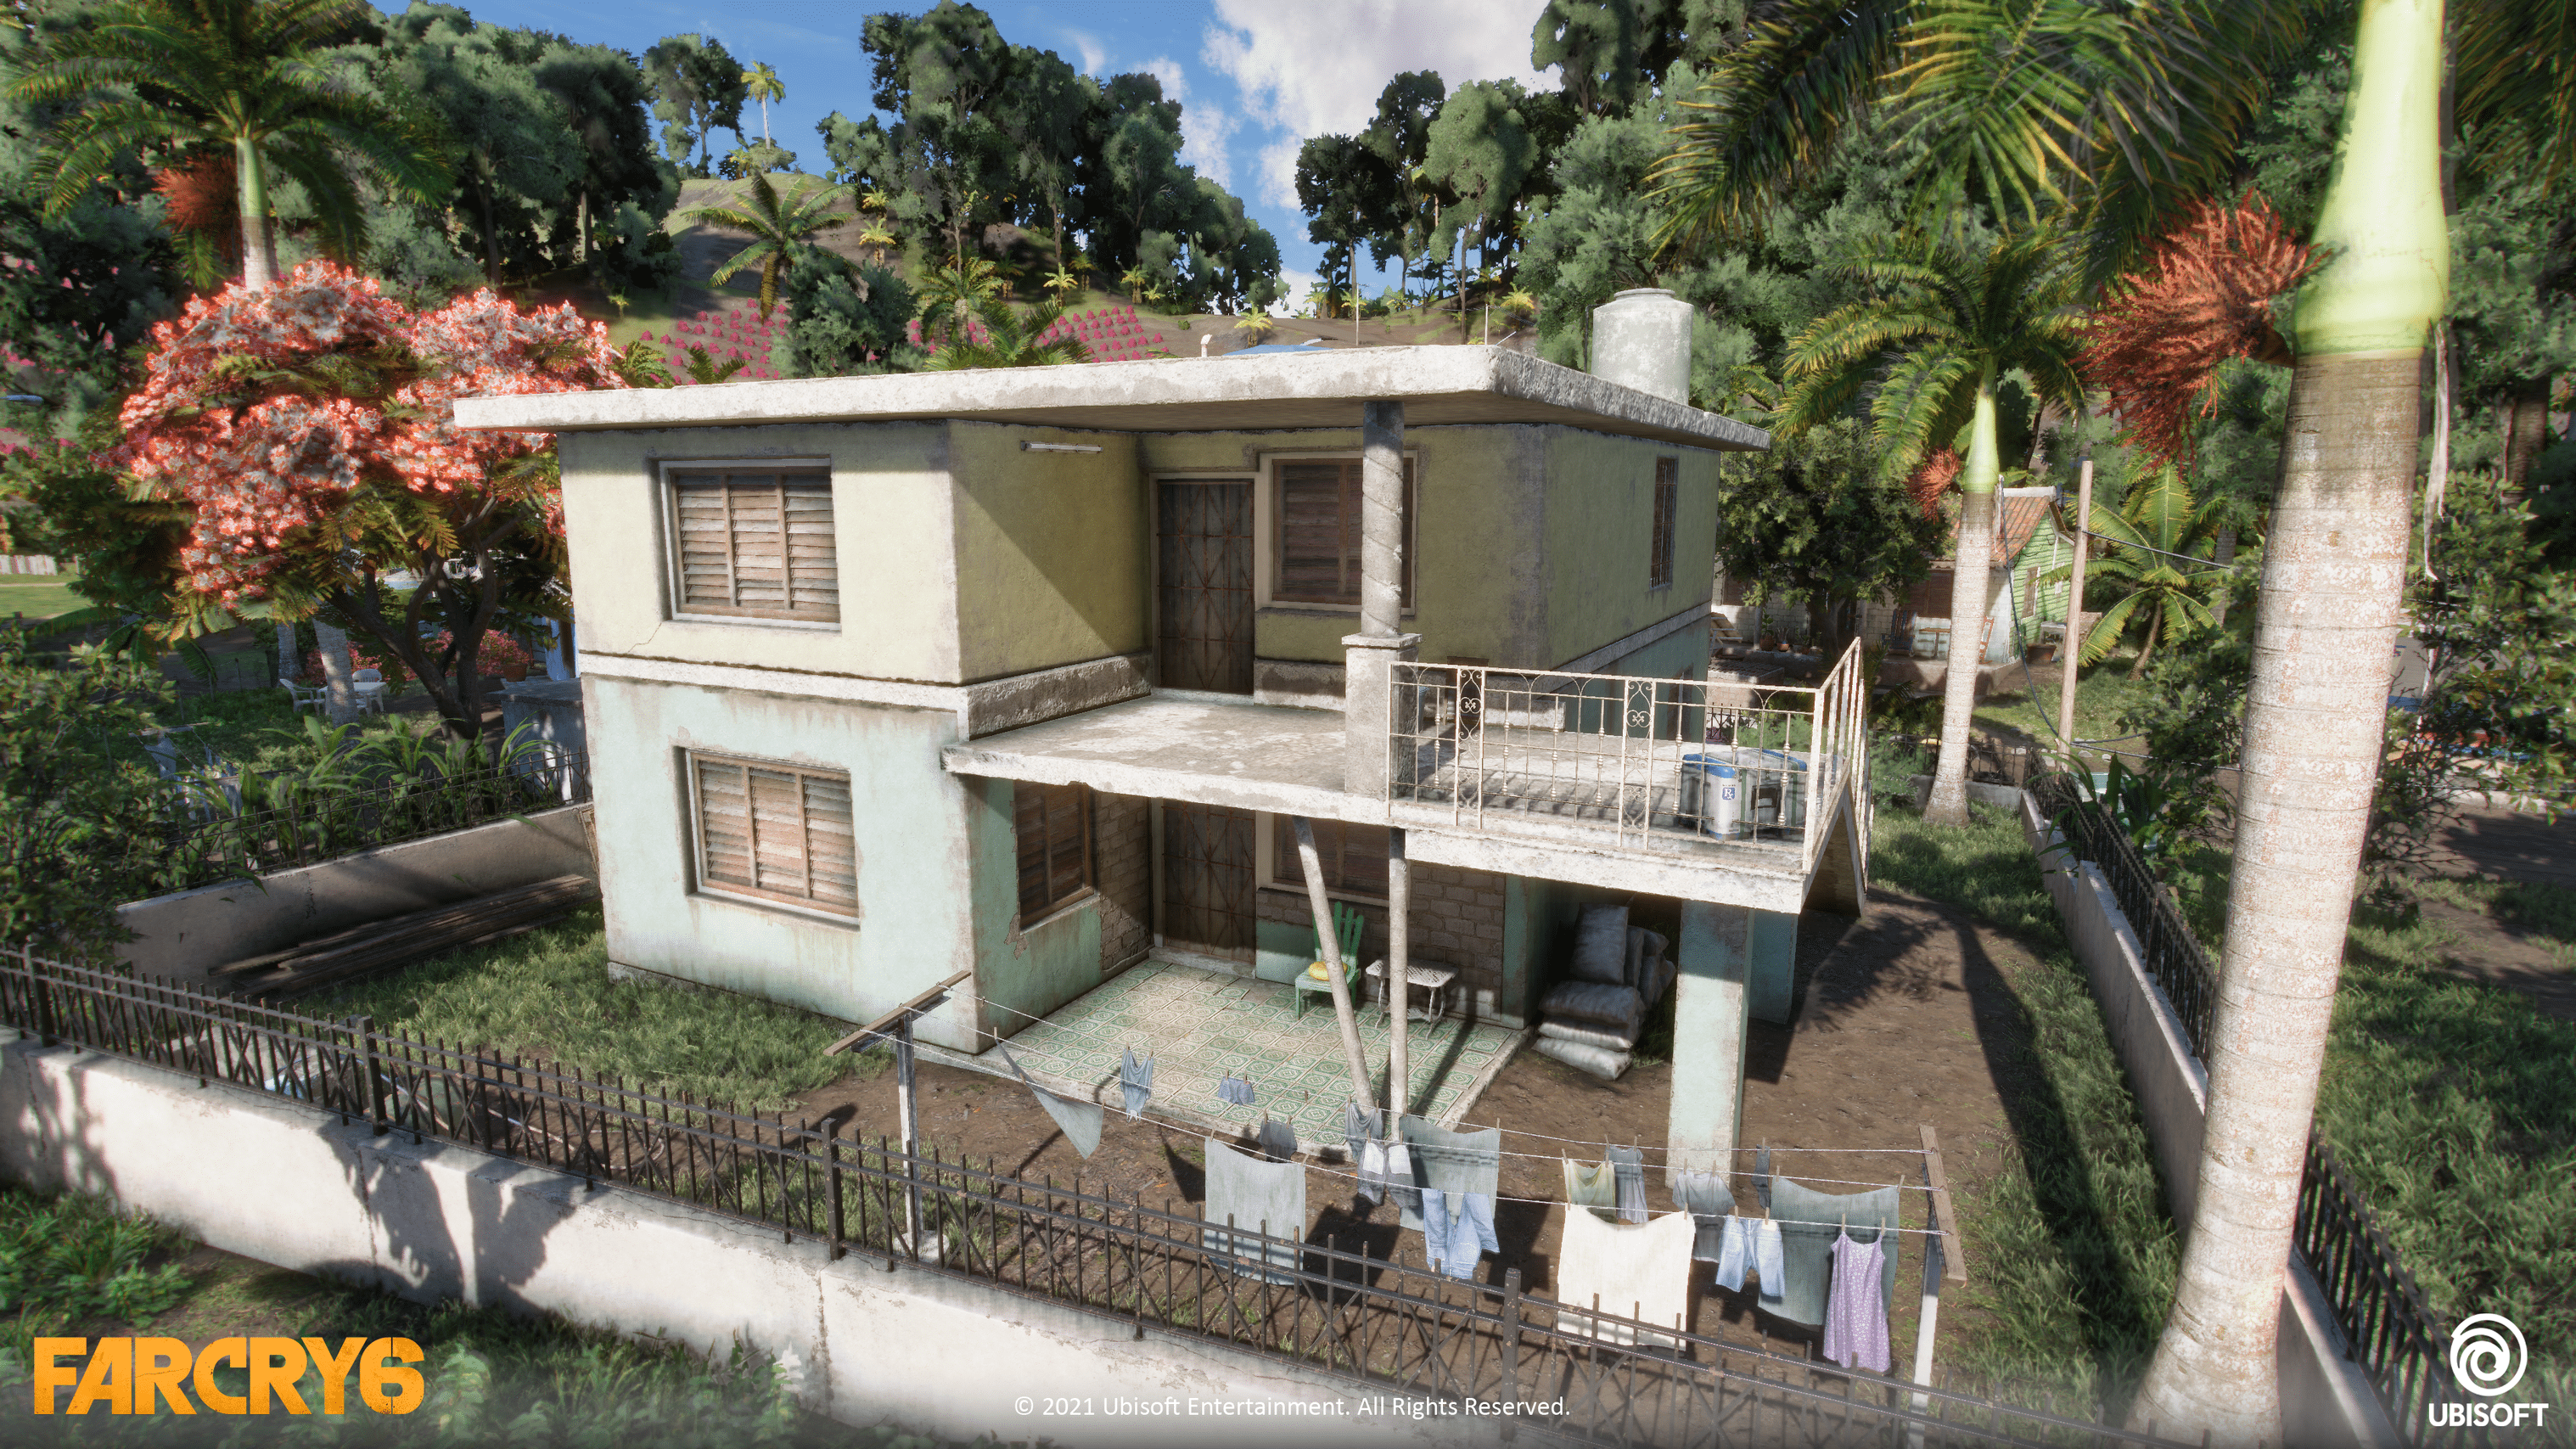 Far Cry 6 art, two-storey house